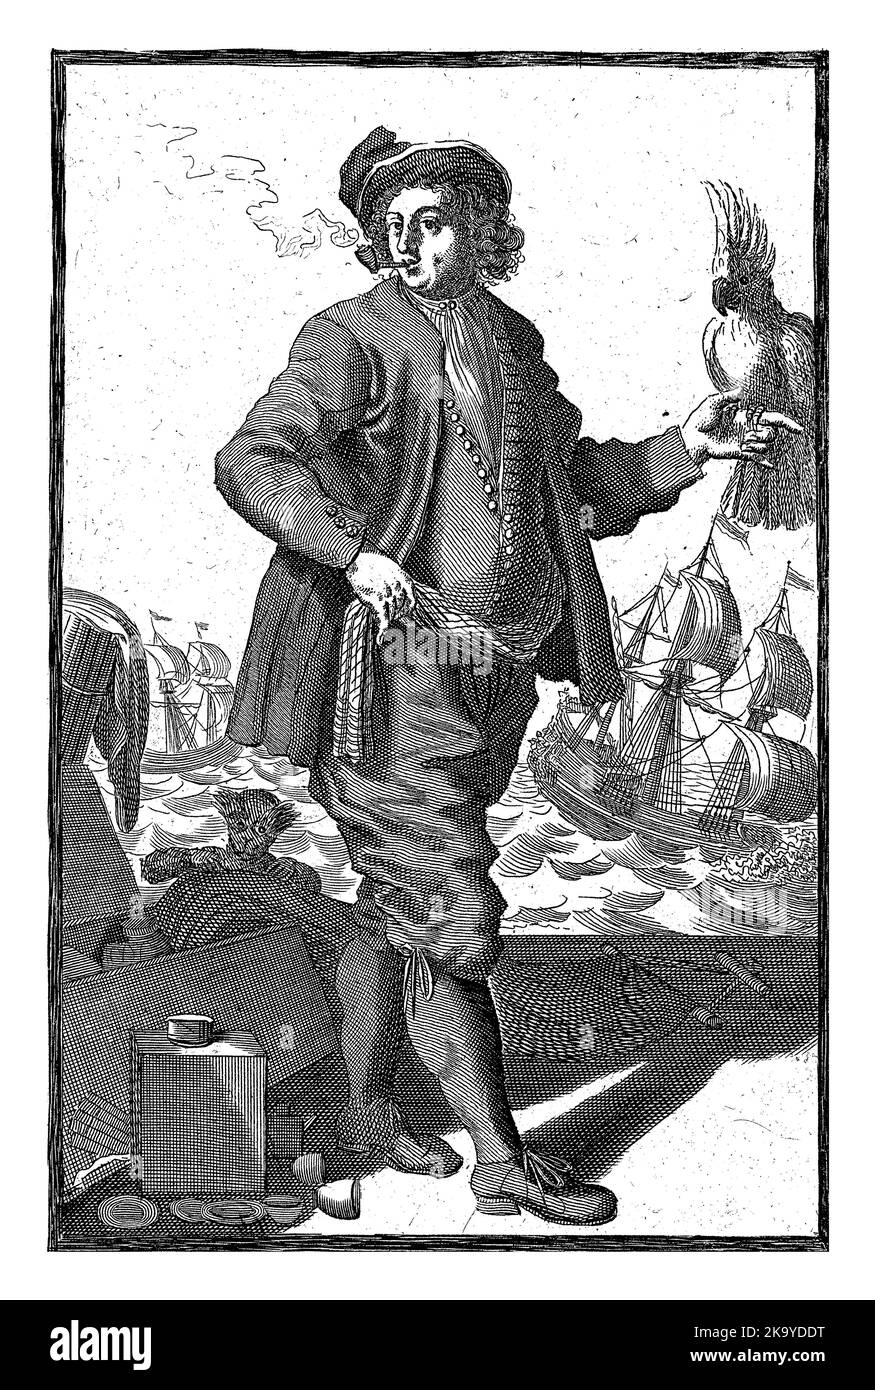 A boatman of an Indie sailor with a pipe in his mouth and a parrot in his hand. Behind him, an animal-like figure unpacks a box of things. Print from Stock Photo